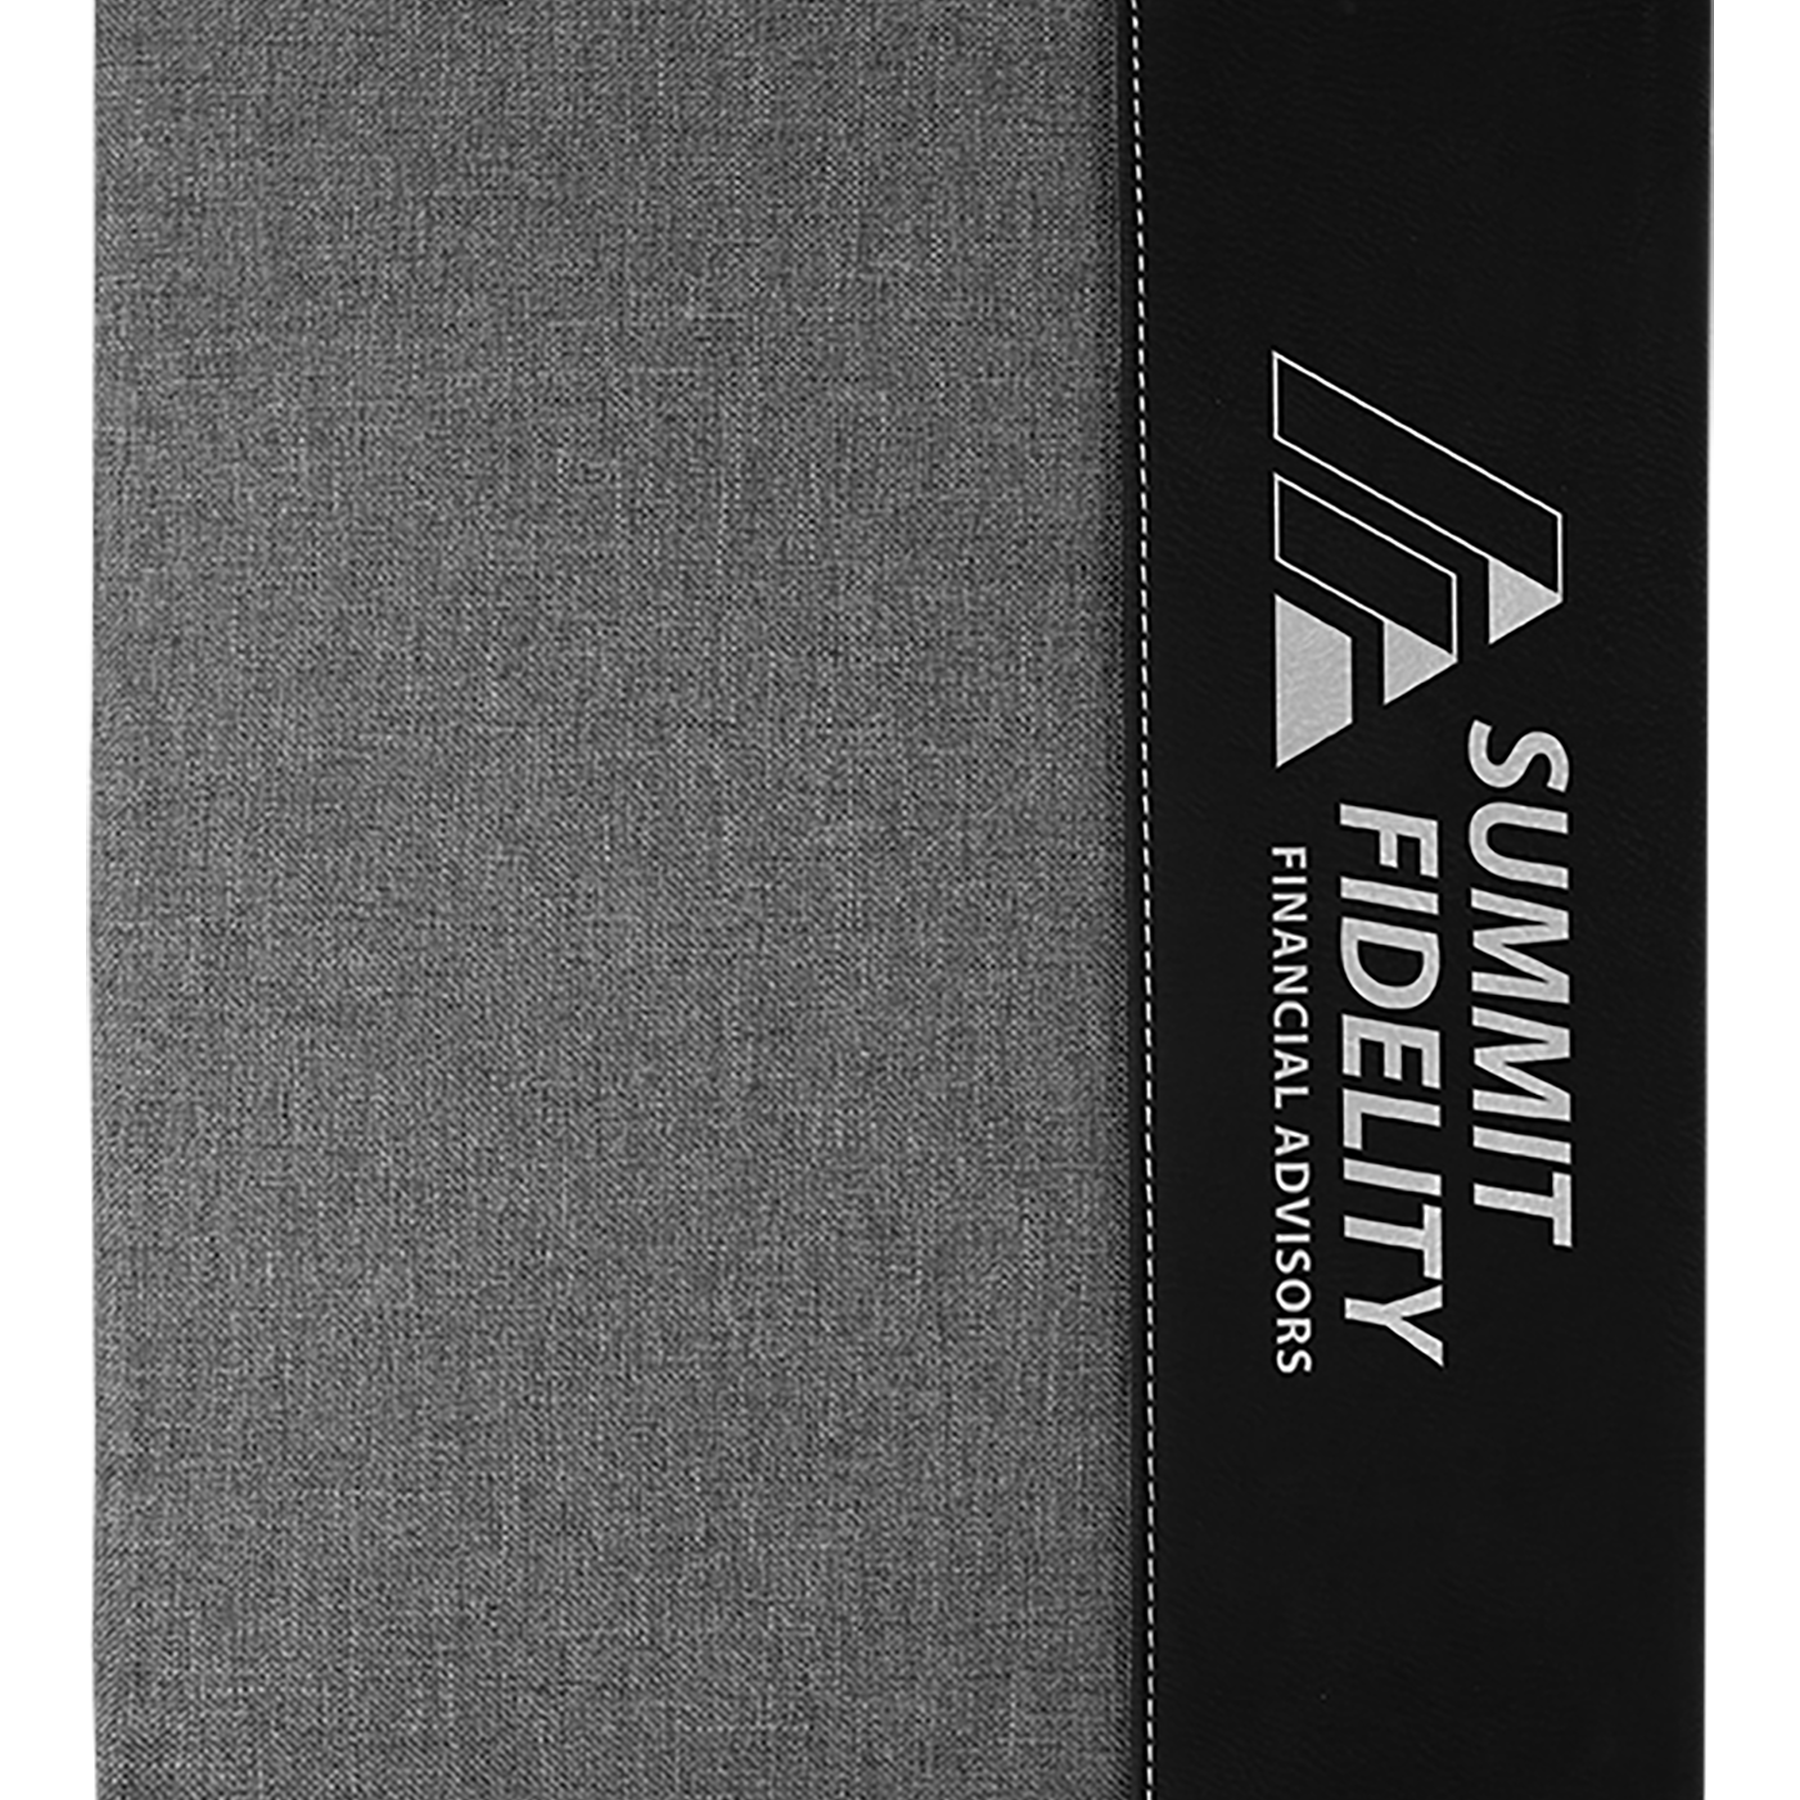 9.5x12 Leatherette/Canvas portfolio with notepad